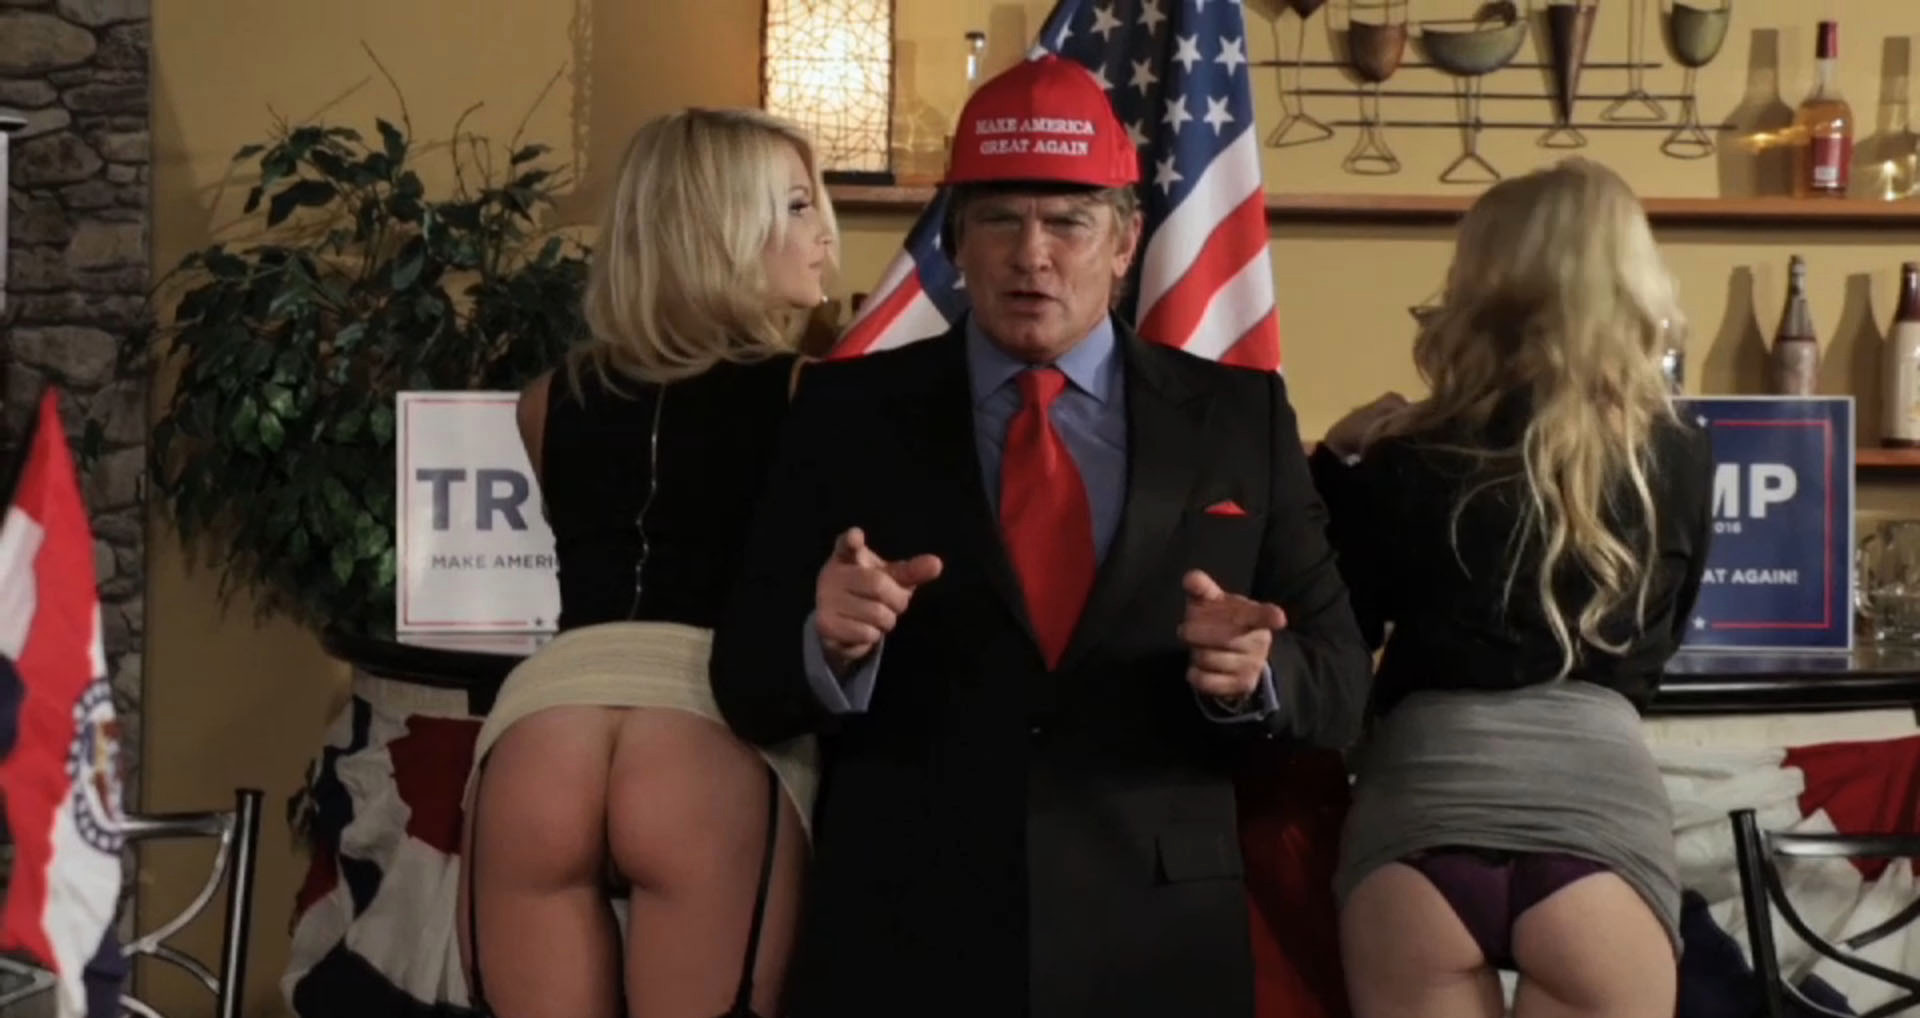 new porn film the donald features lookalike of us presidential hopeful getting it on with dozens of women